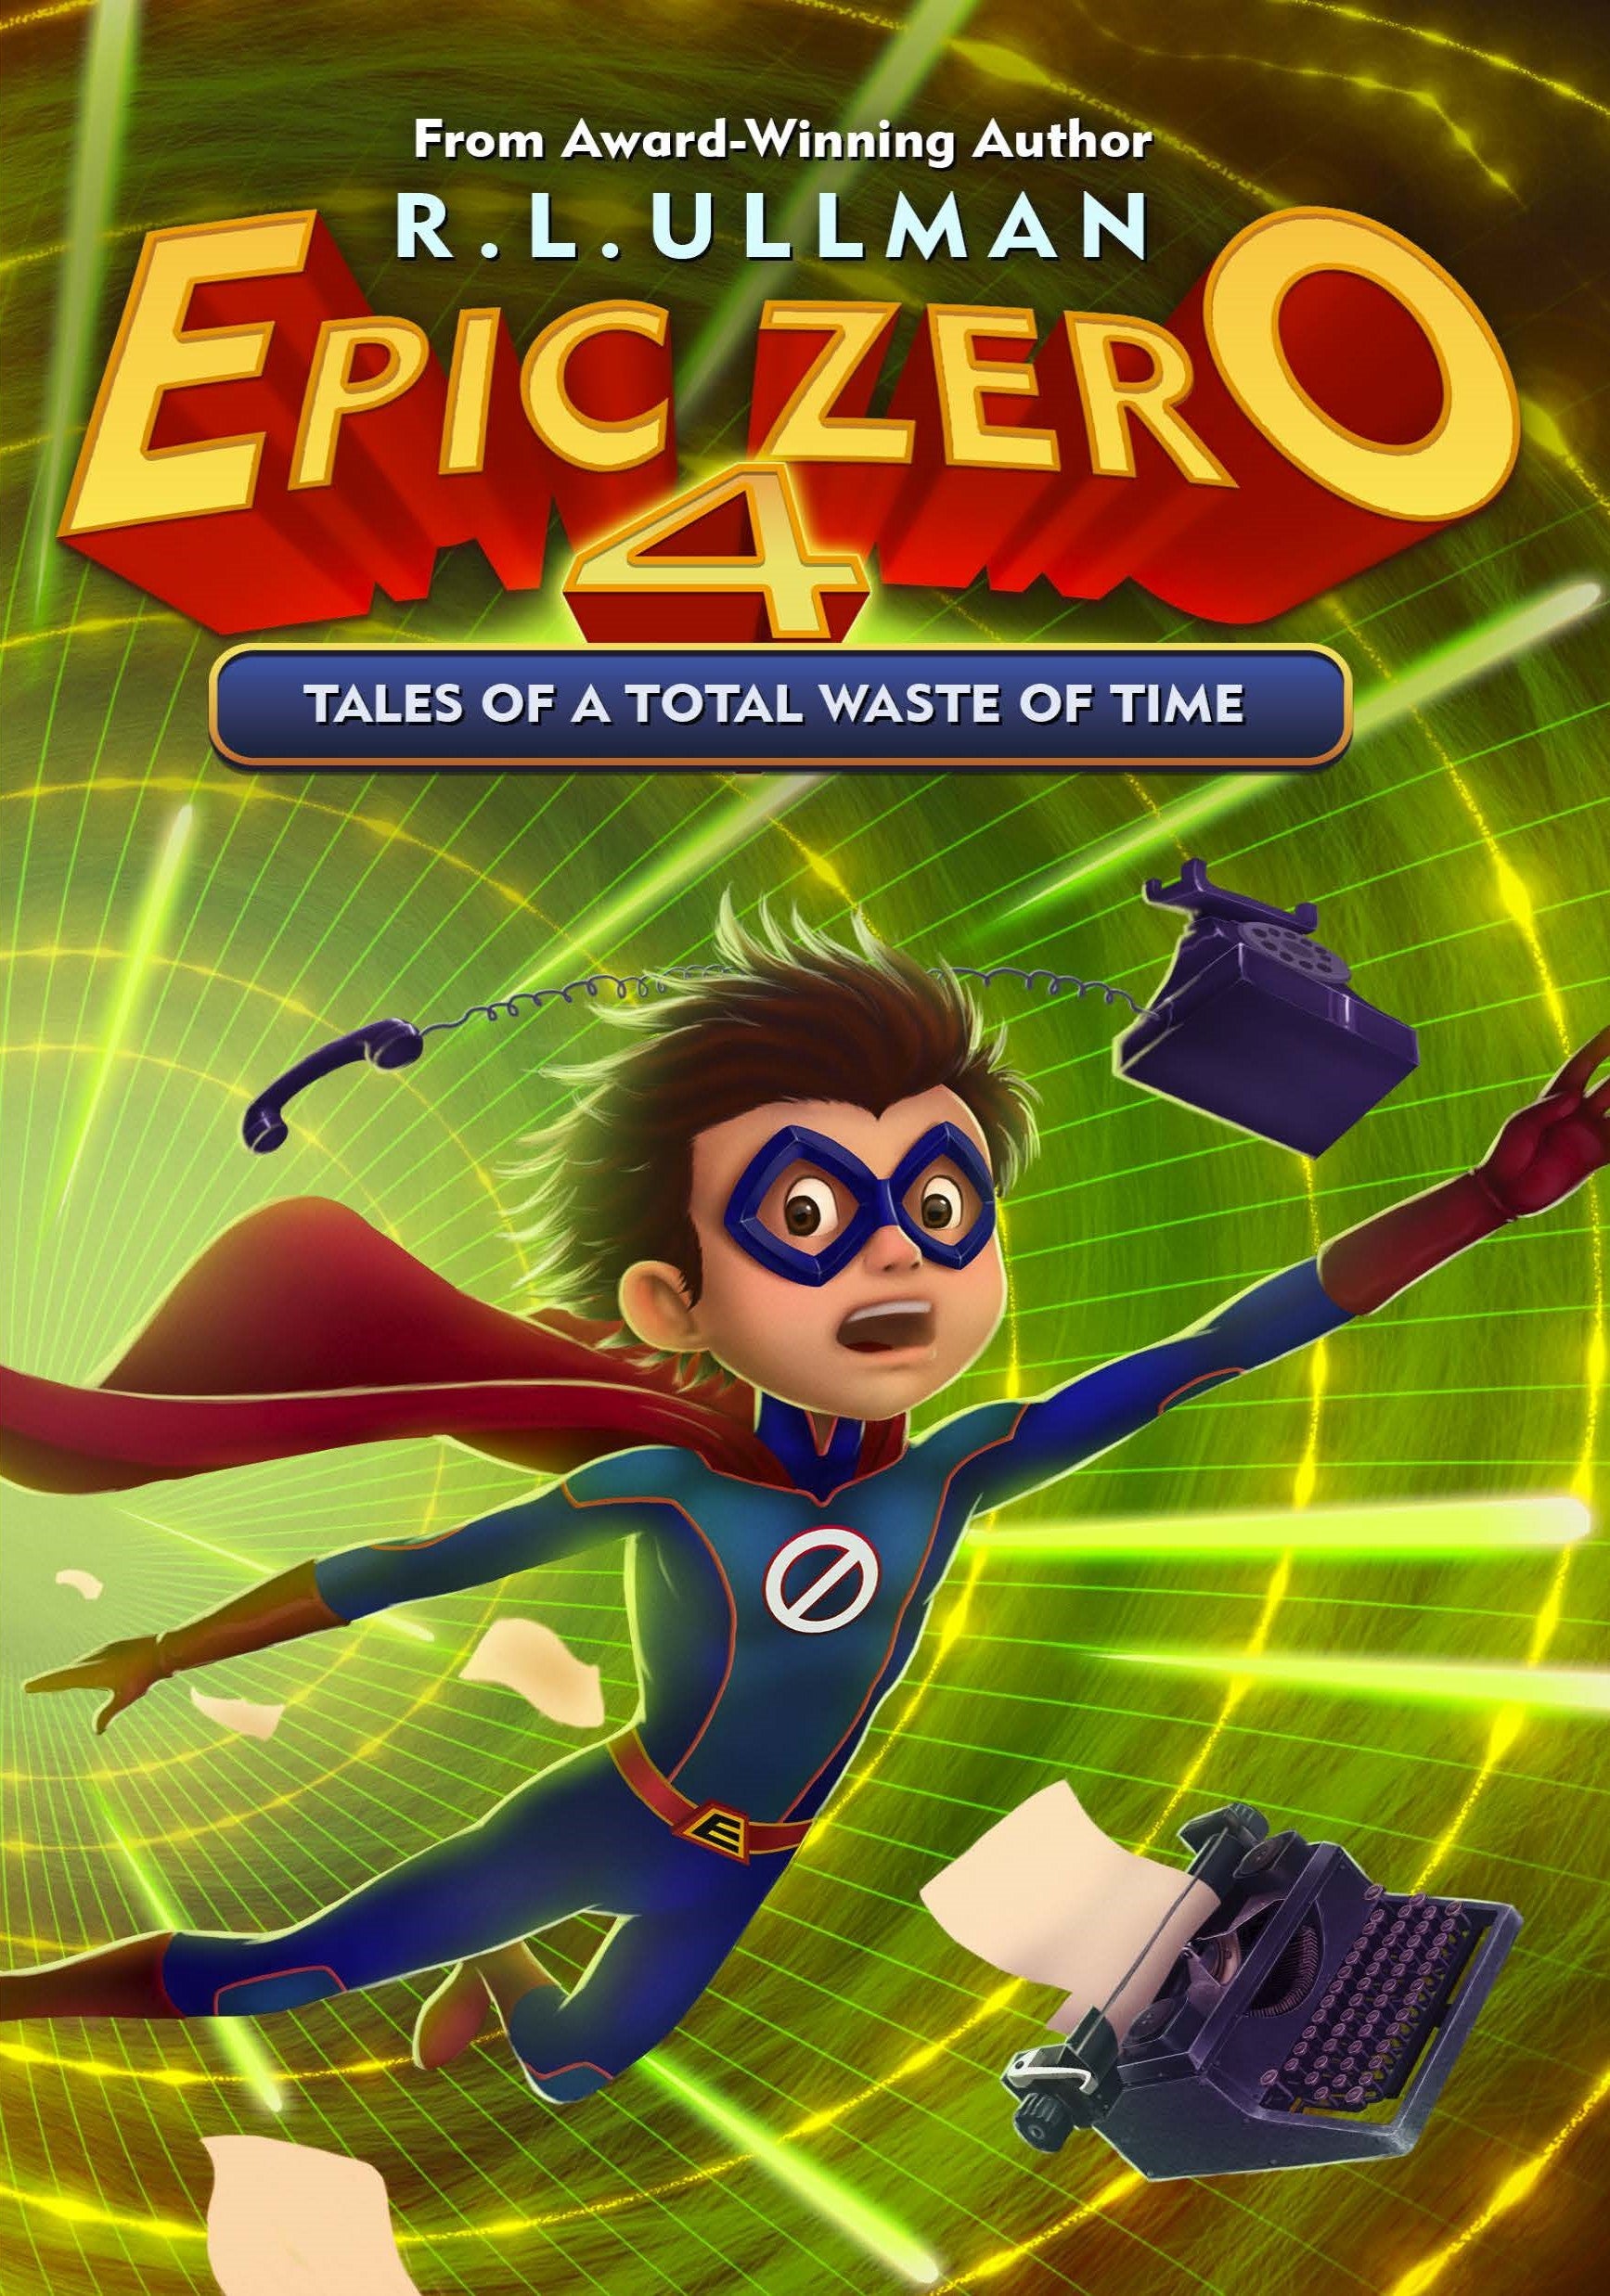 Epic Zero 4: Tales of a Total Waste of Time (Paperback)